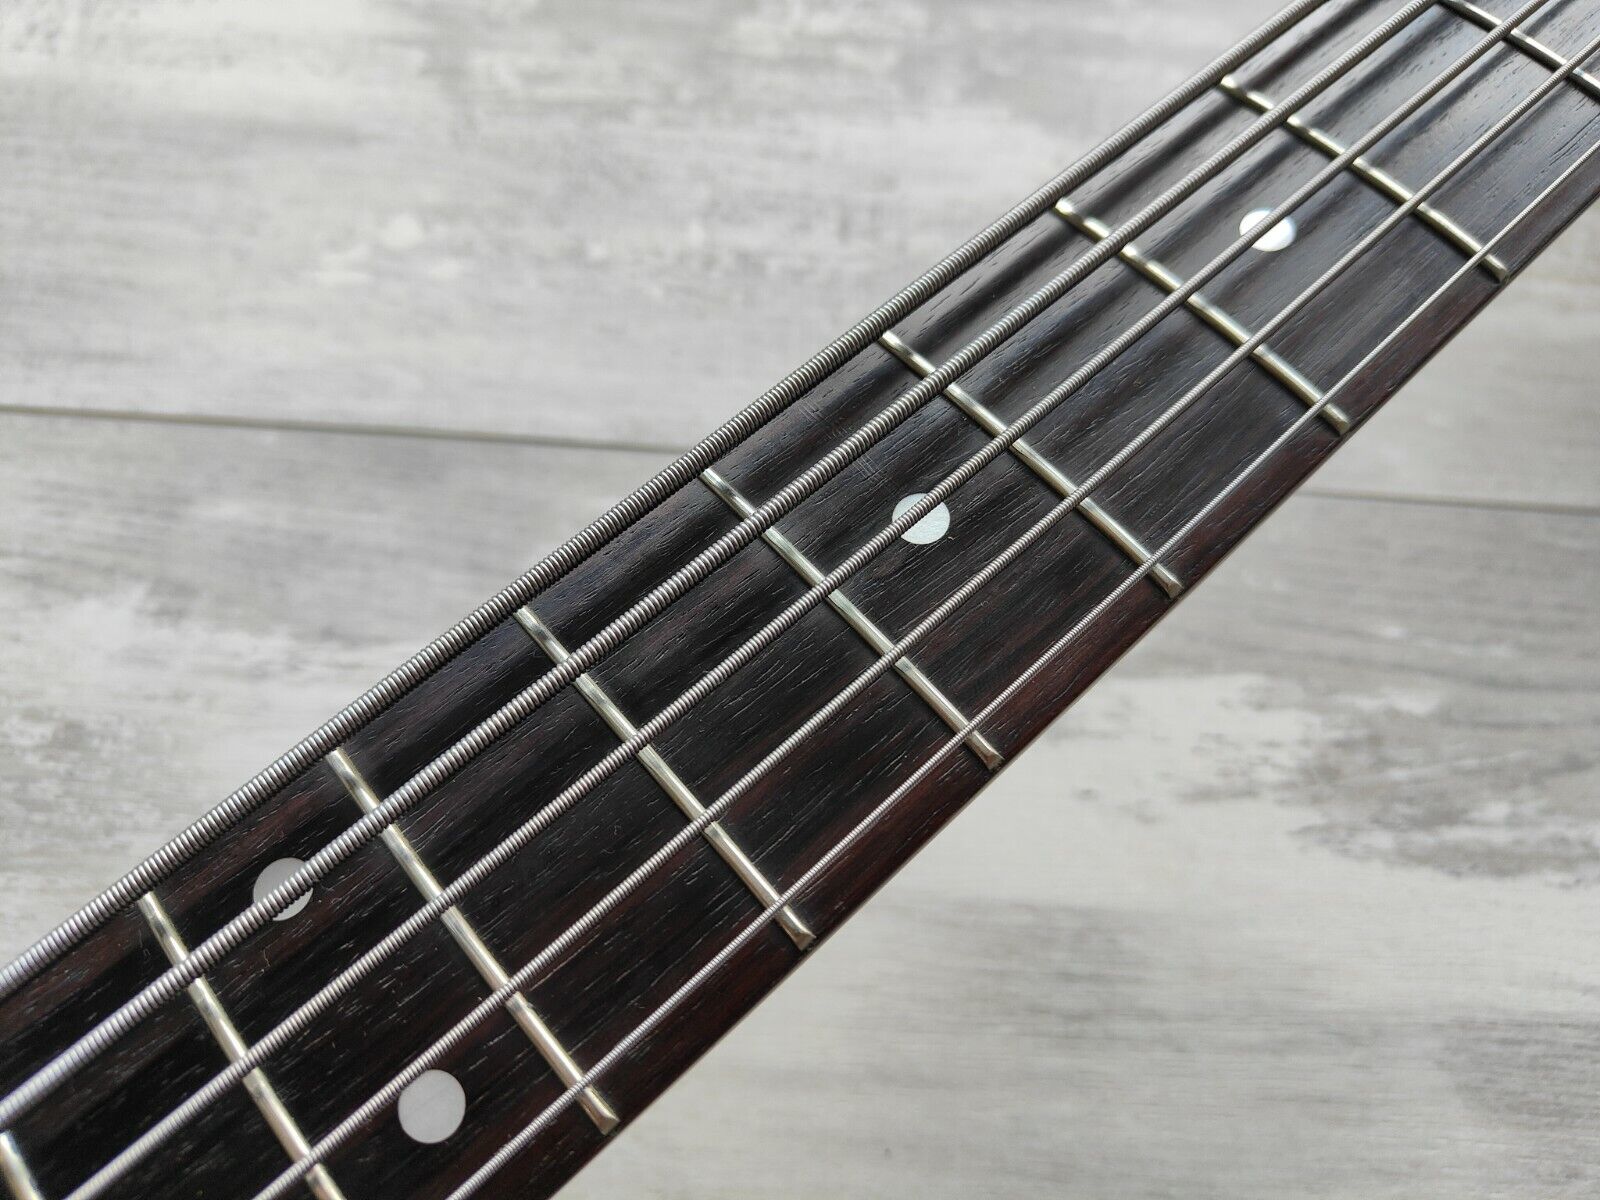 1984 Aria Pro II Japan RSB Deluxe 5-String Bass (Black)